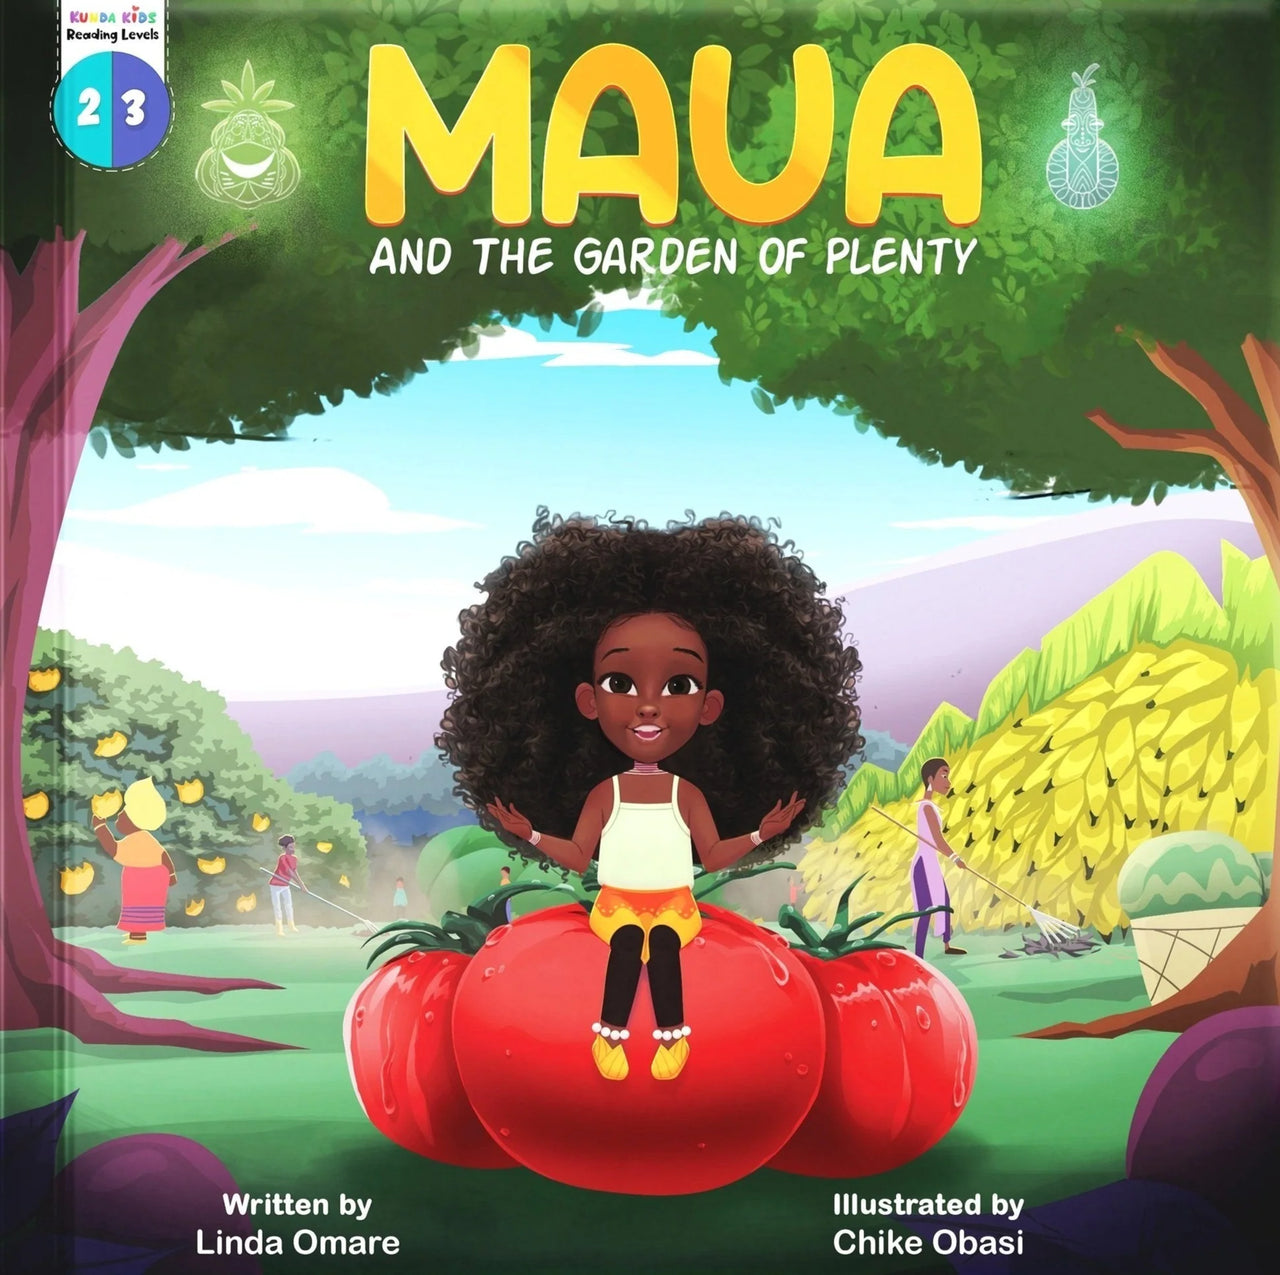 Maua and the Garden of Plenty by Linda Omare